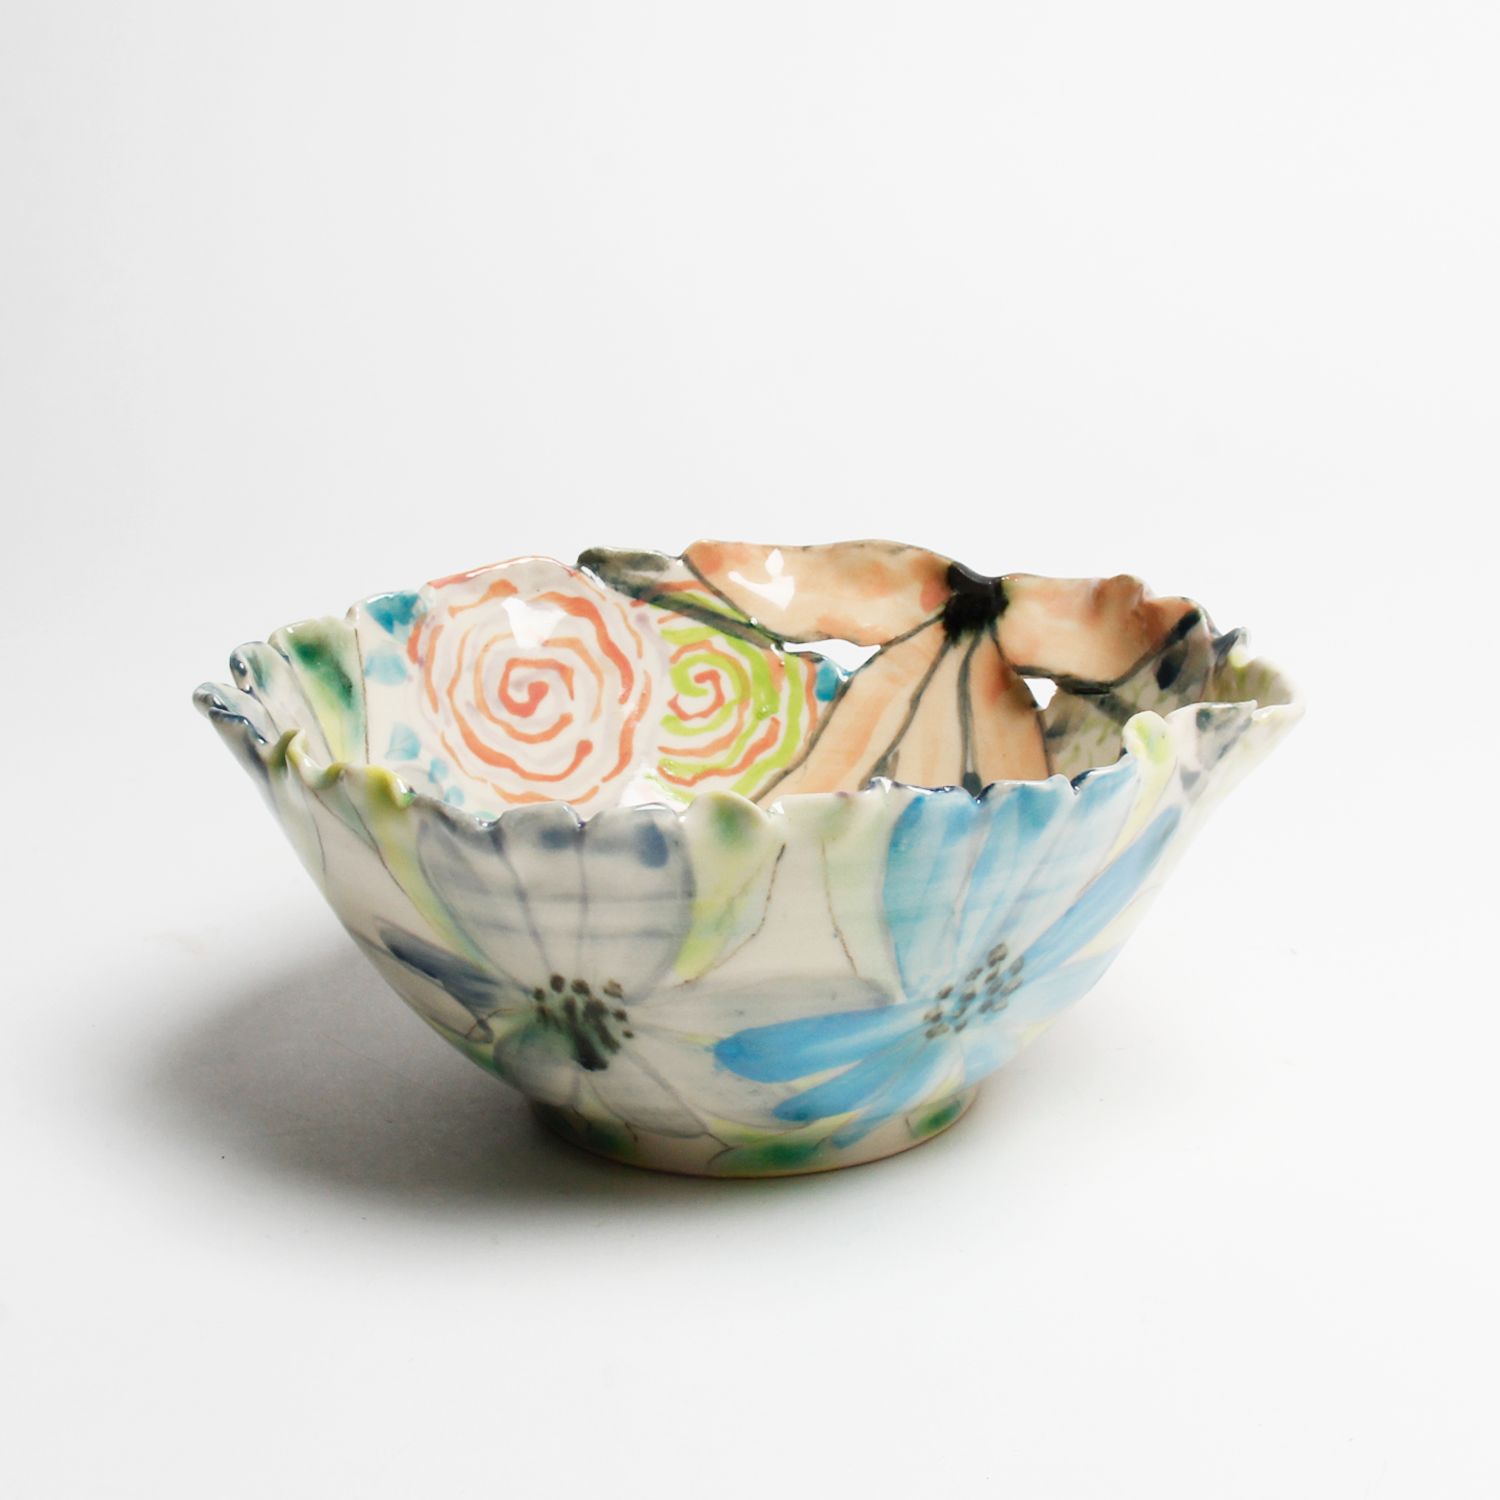 Susan Card: Floral Bowl 1 Product Image 1 of 4